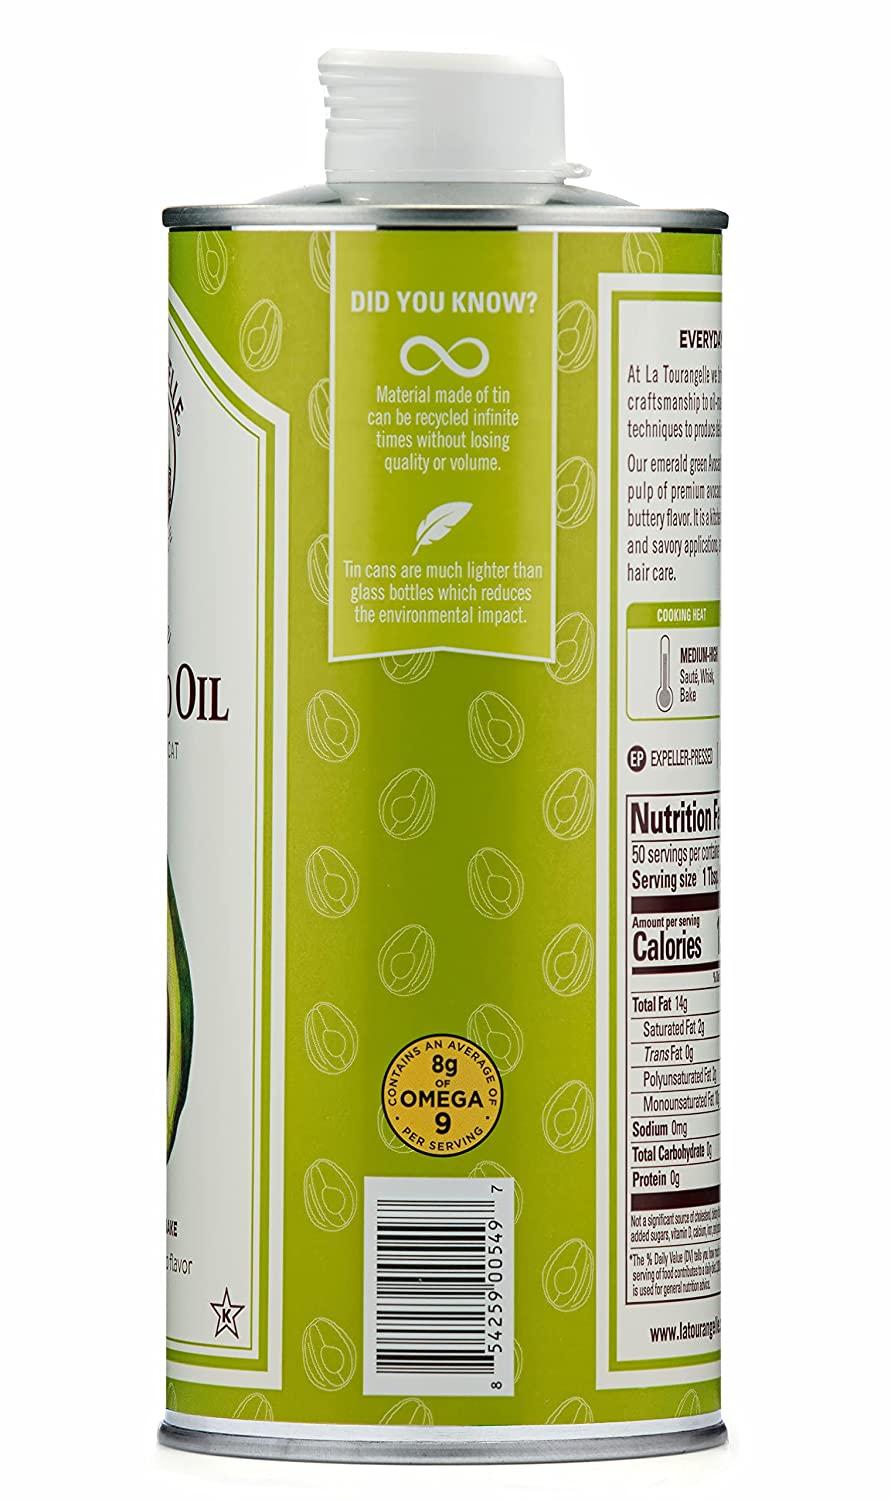 Save on La Tourangelle Delicate Avocado Oil All Natural Order Online  Delivery